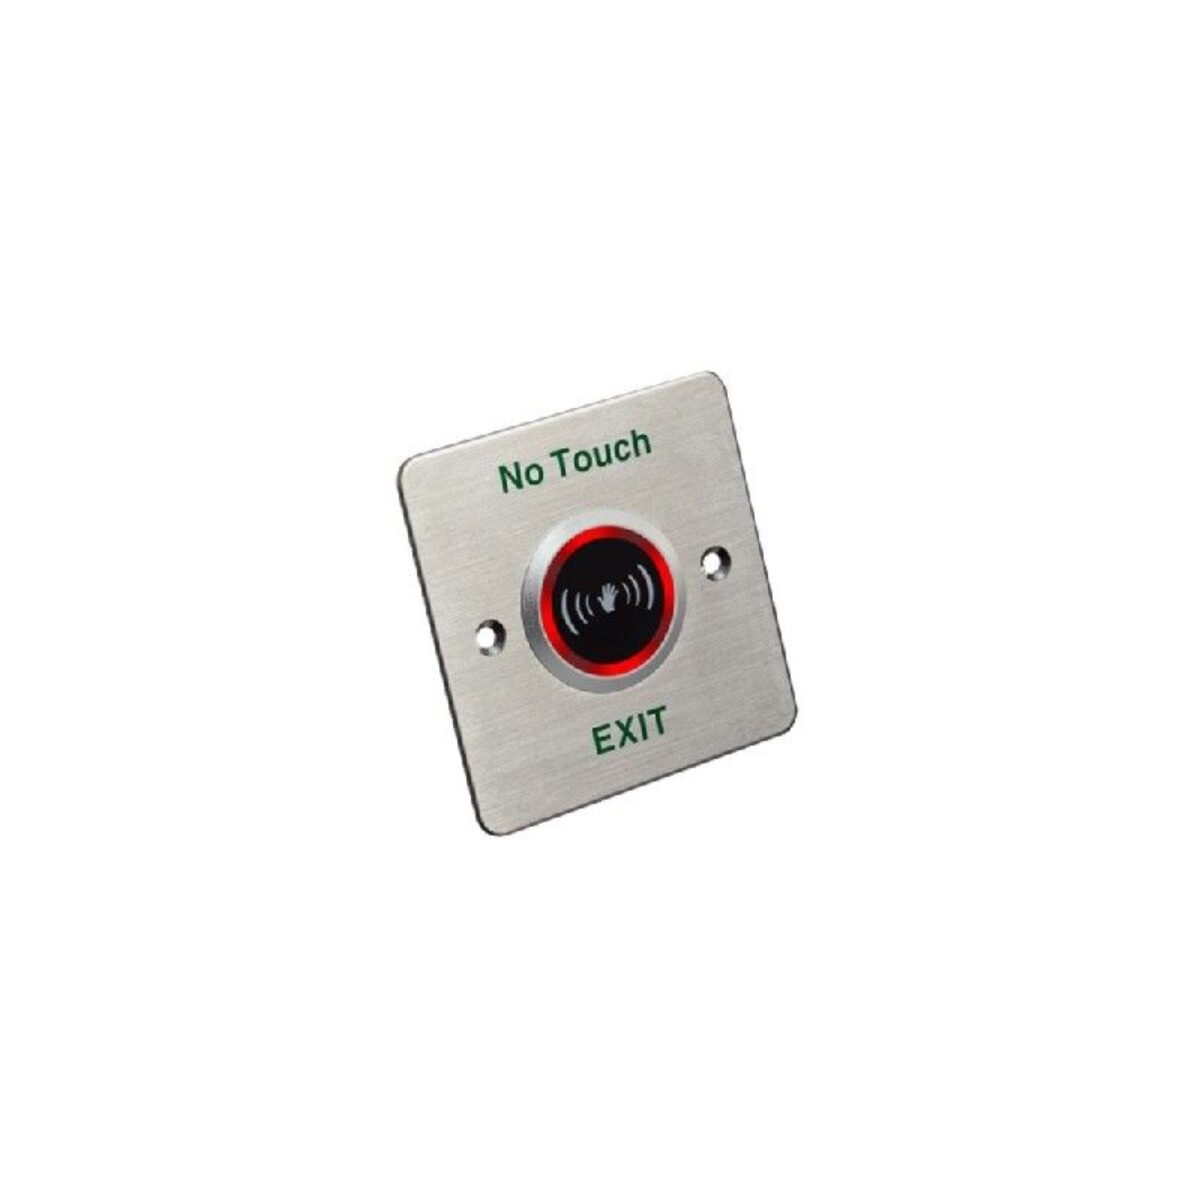 Hikvision Exit & Emergency Button Non Touch Stainless Steel Panel – DS‐K7P03